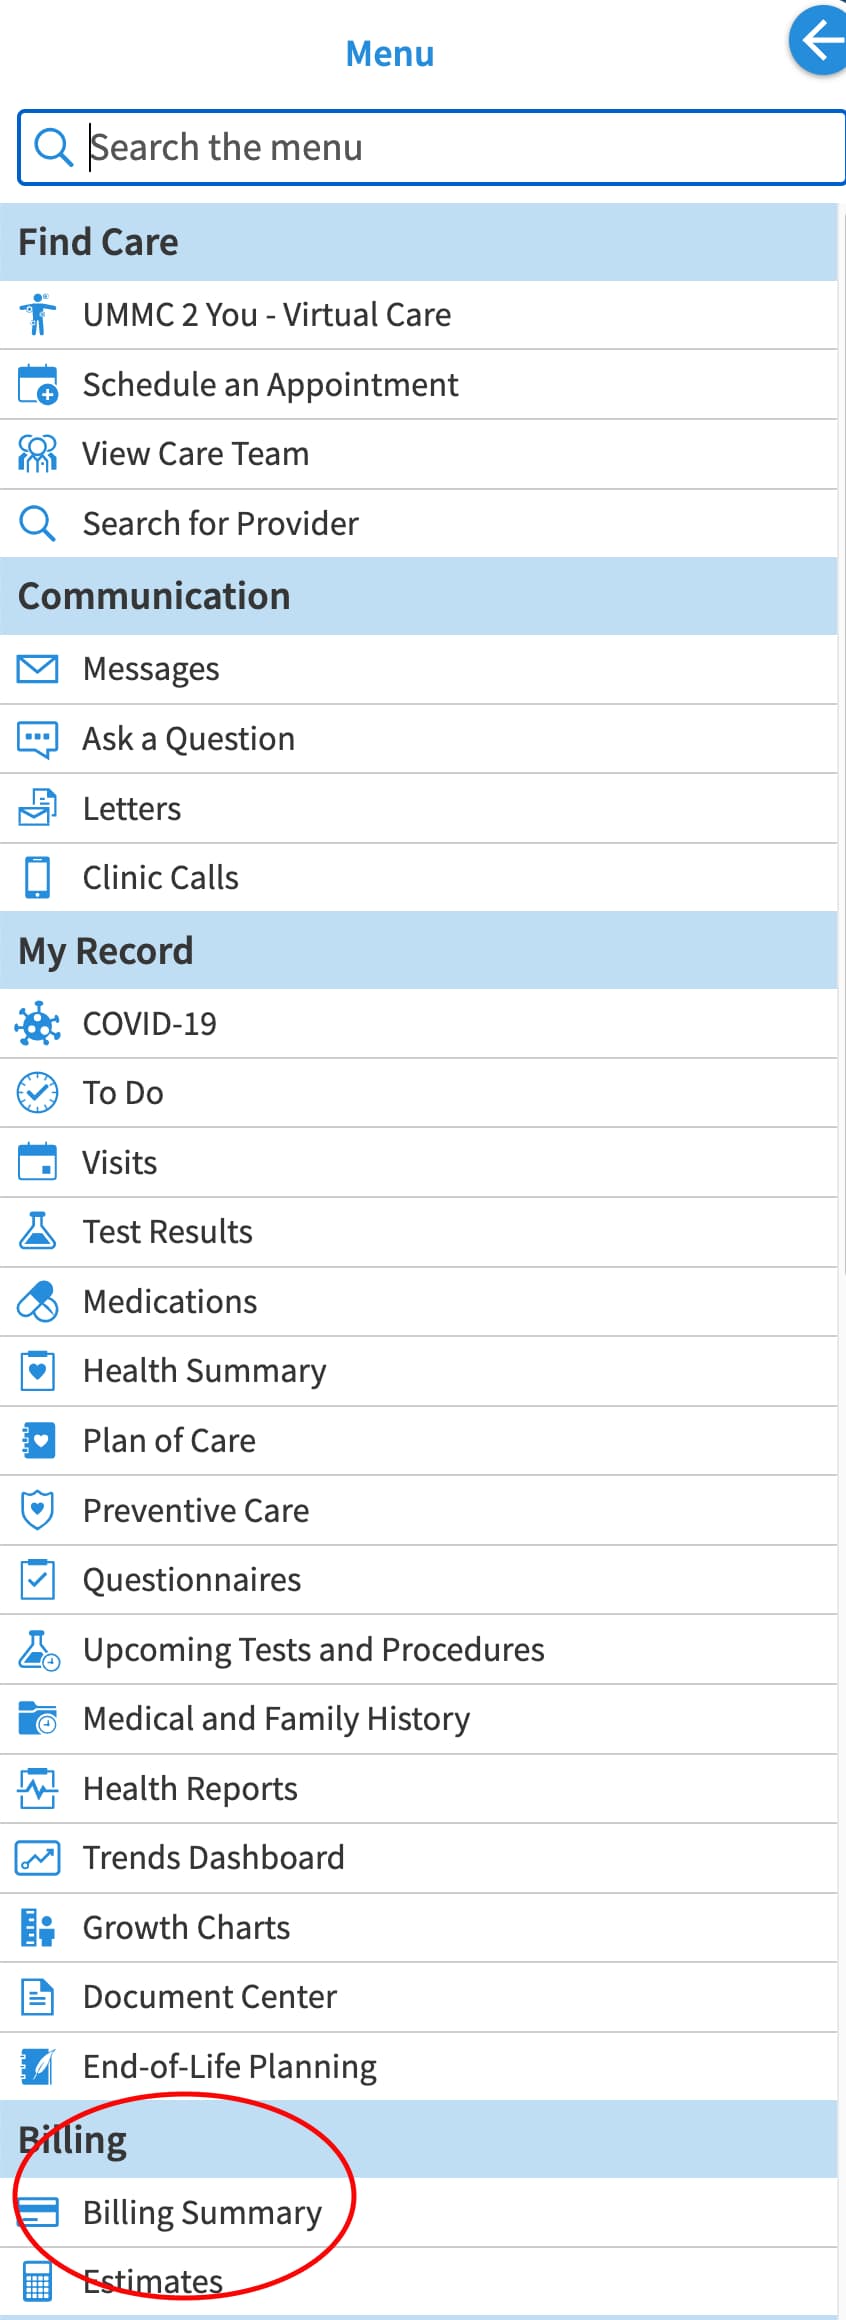 A screenshot of the MyChart menu after it is expanded shows multiple options including Billing Statement and Billing Summary.